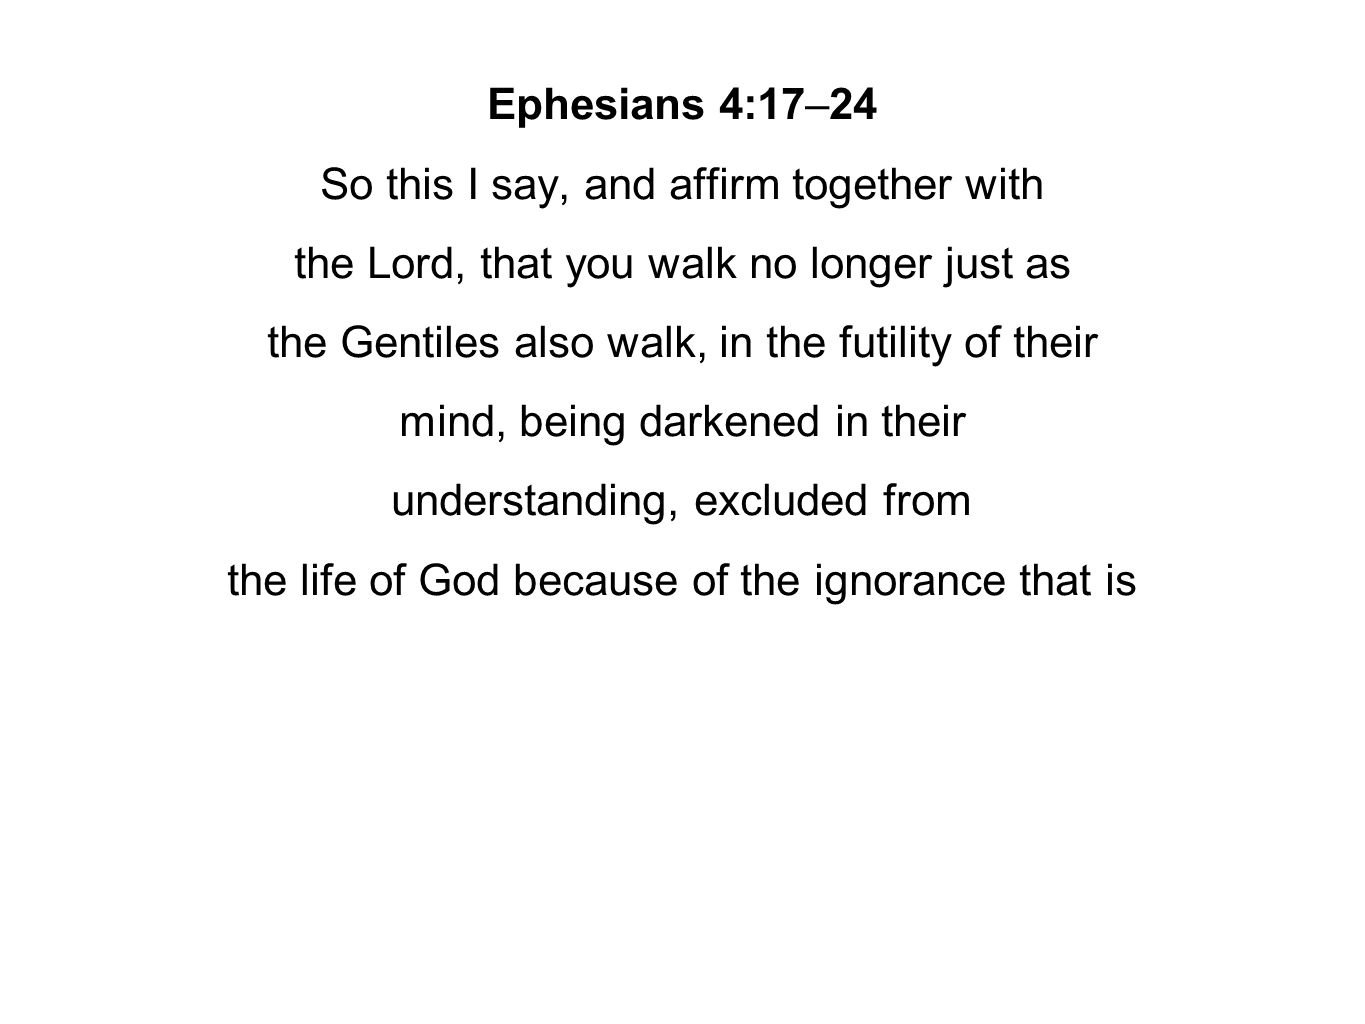 Ephesians 4:17–24 So this I say, and affirm together with the Lord, that you walk no longer just as the Gentiles also walk, in the futility of their mind, being darkened in their understanding, excluded from the life of God because of the ignorance that is